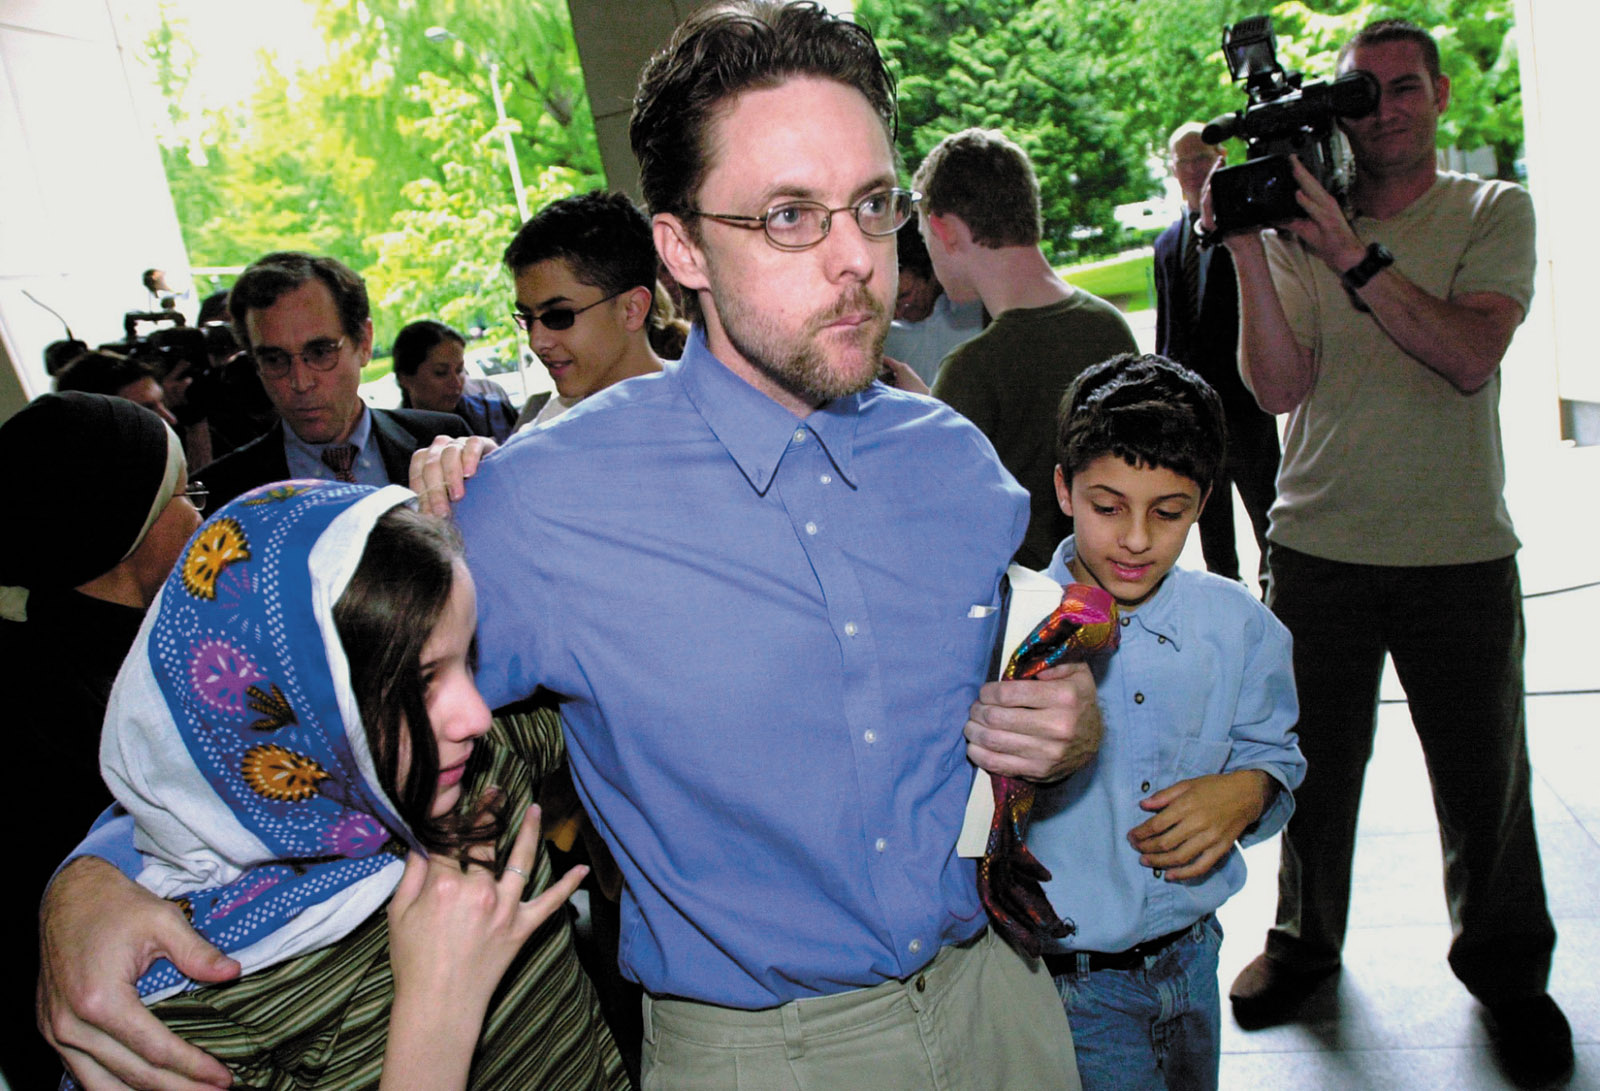 Brandon Mayfield and his children outside a federal courthouse after his release from custody, Portland, Oregon, May 2004.